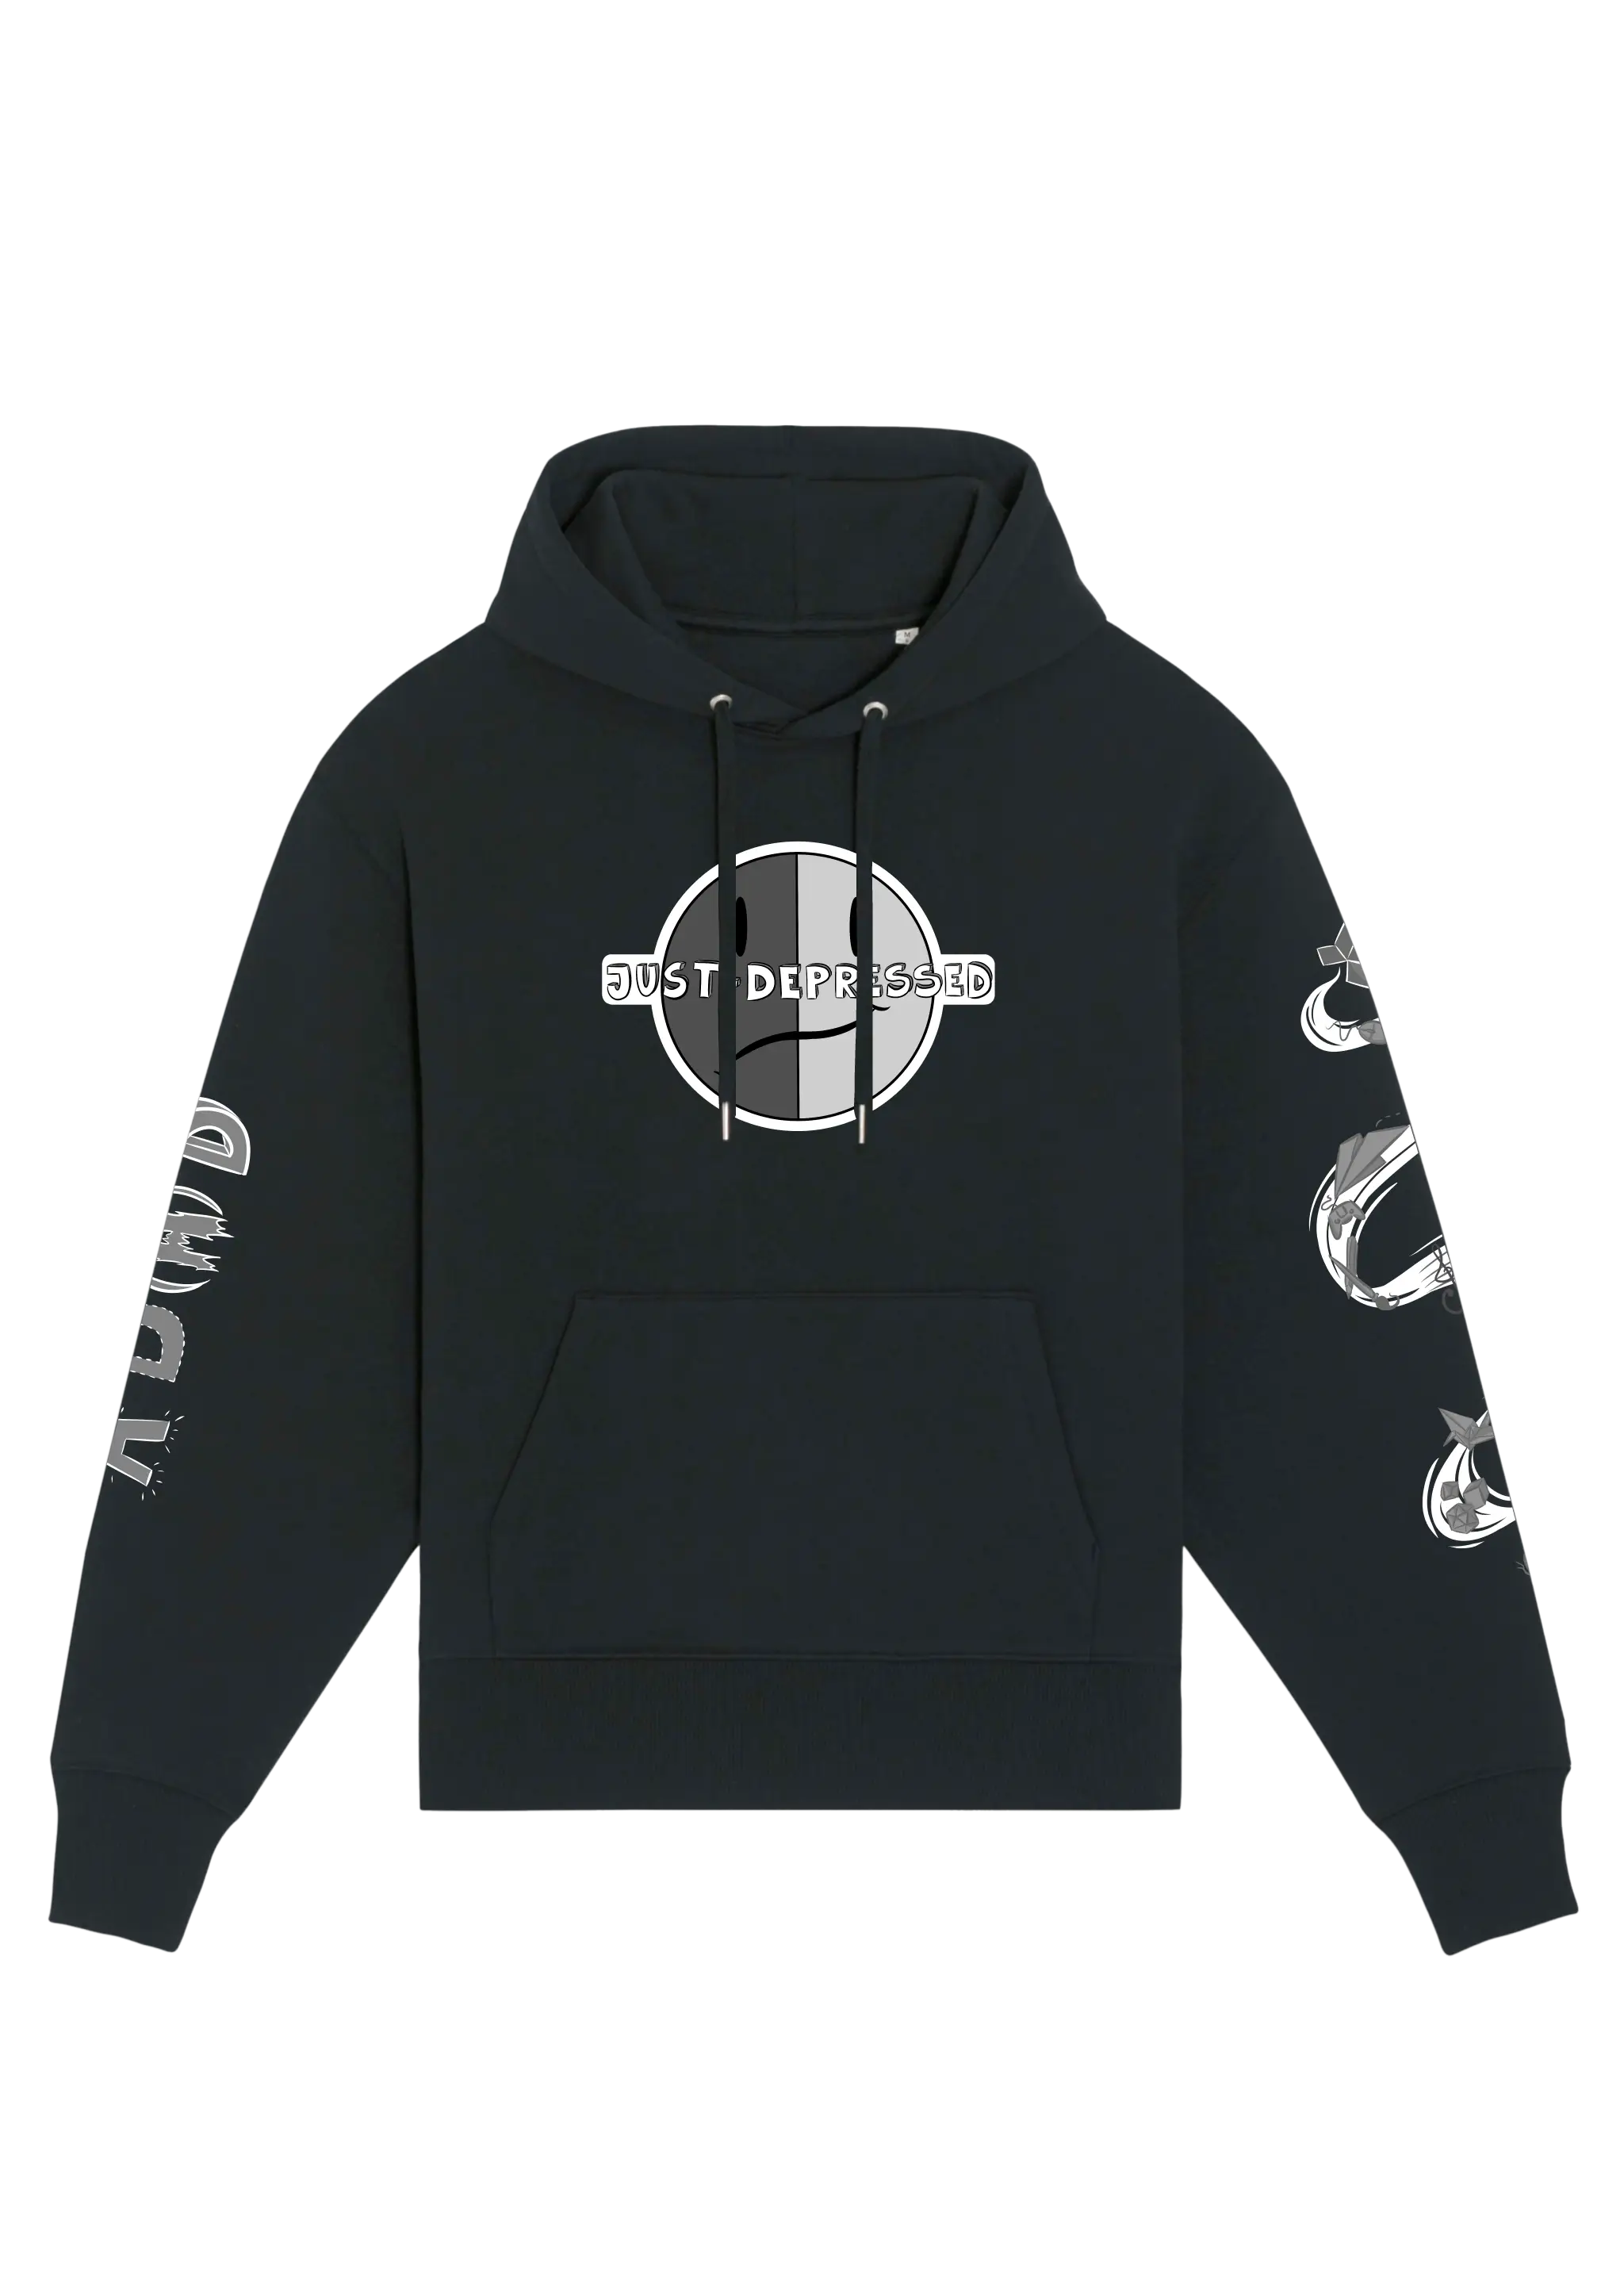 AD(H)D - heavy oversized Hoodie 500GSM